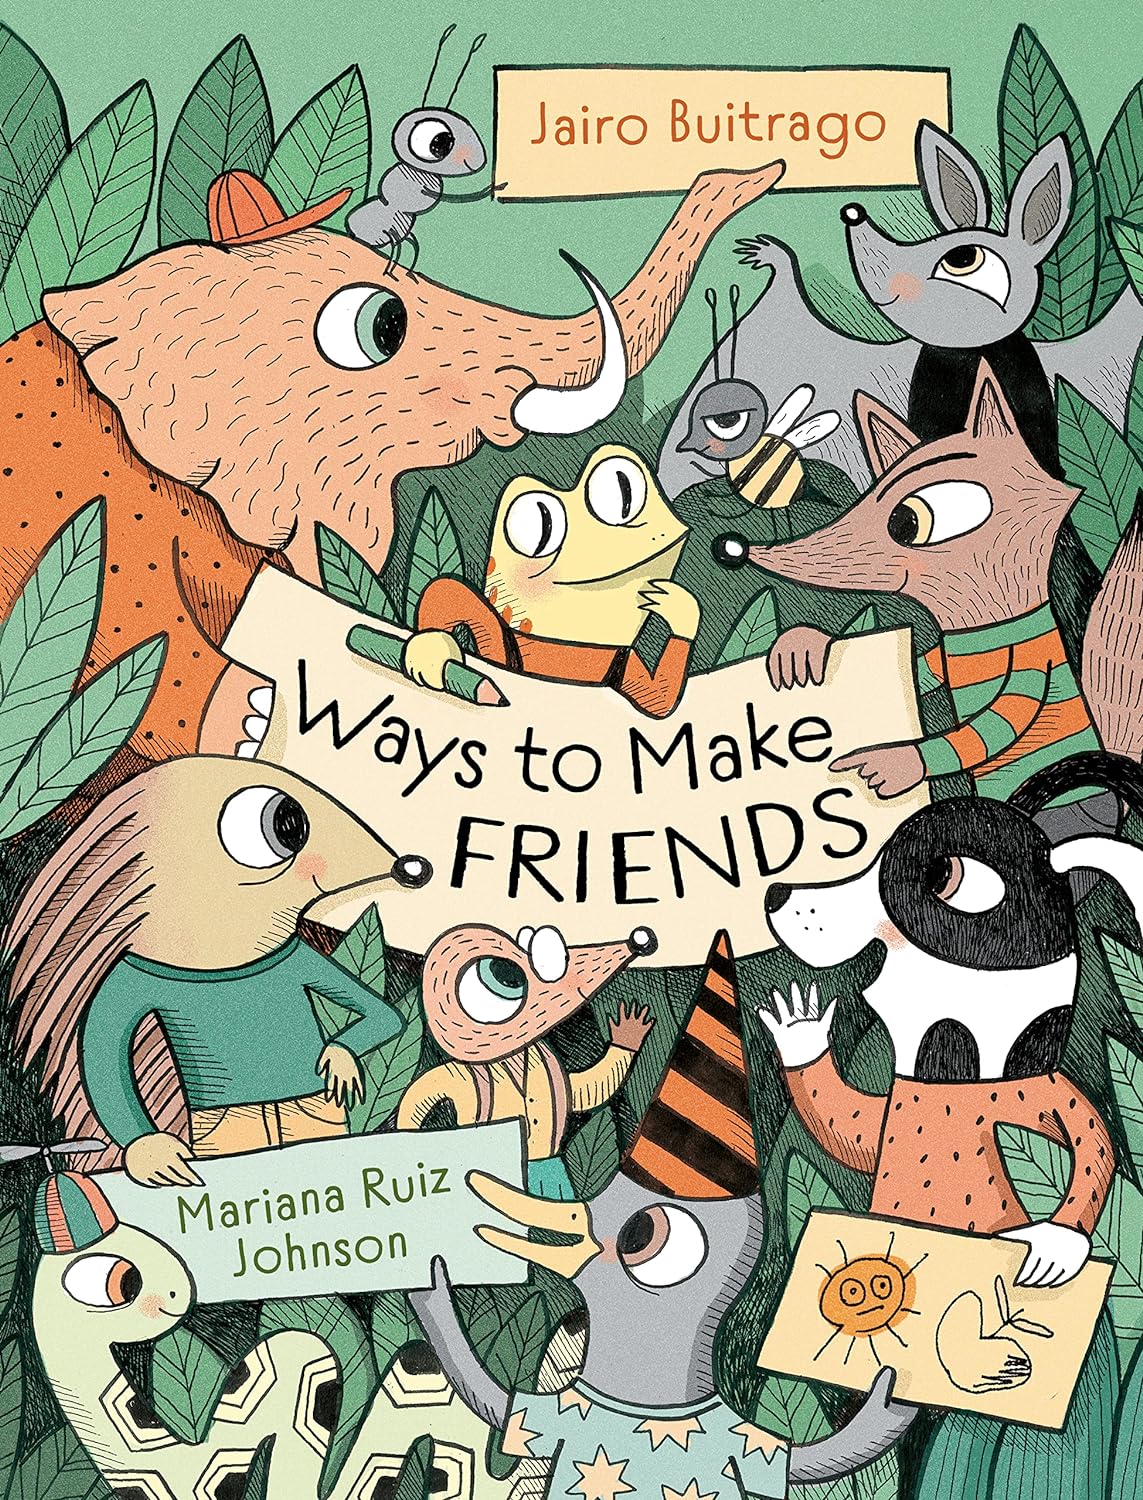 Cover for Ways to Make Friends featuring an illustration of a group of friendly looking animals that seem to be having a meeting in a forest setting. Their holding up signs which have the title and authors written on them. The colors on the cover are pastel and the background is light green.